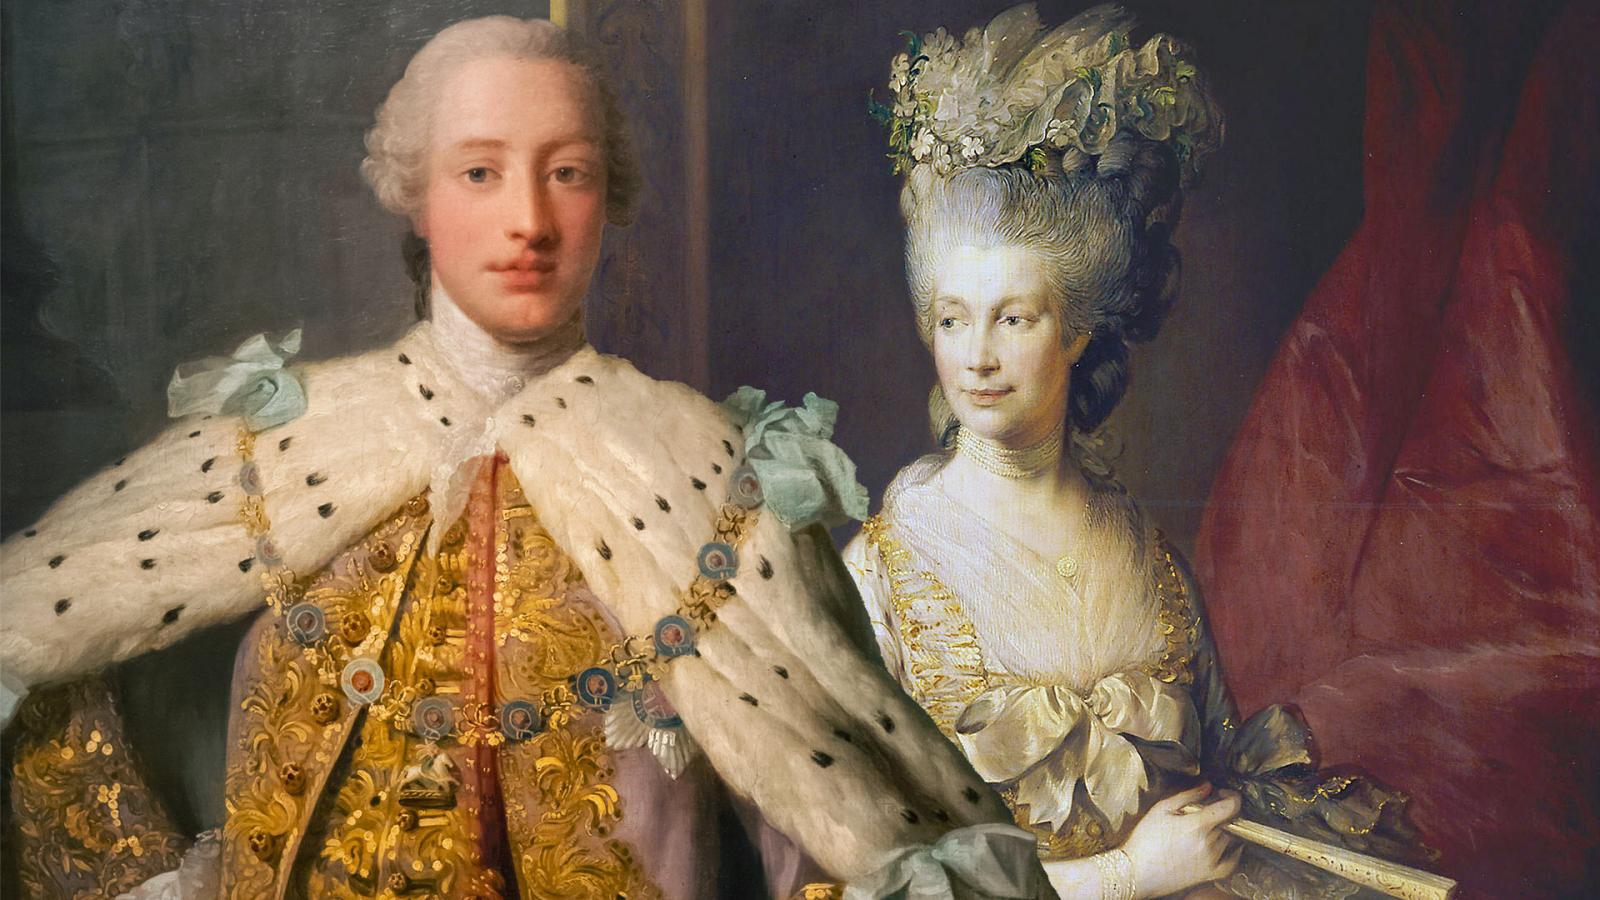 5 Longest Marriages in Royal Family History (No. 5 Lasted 41 years!) - image 3